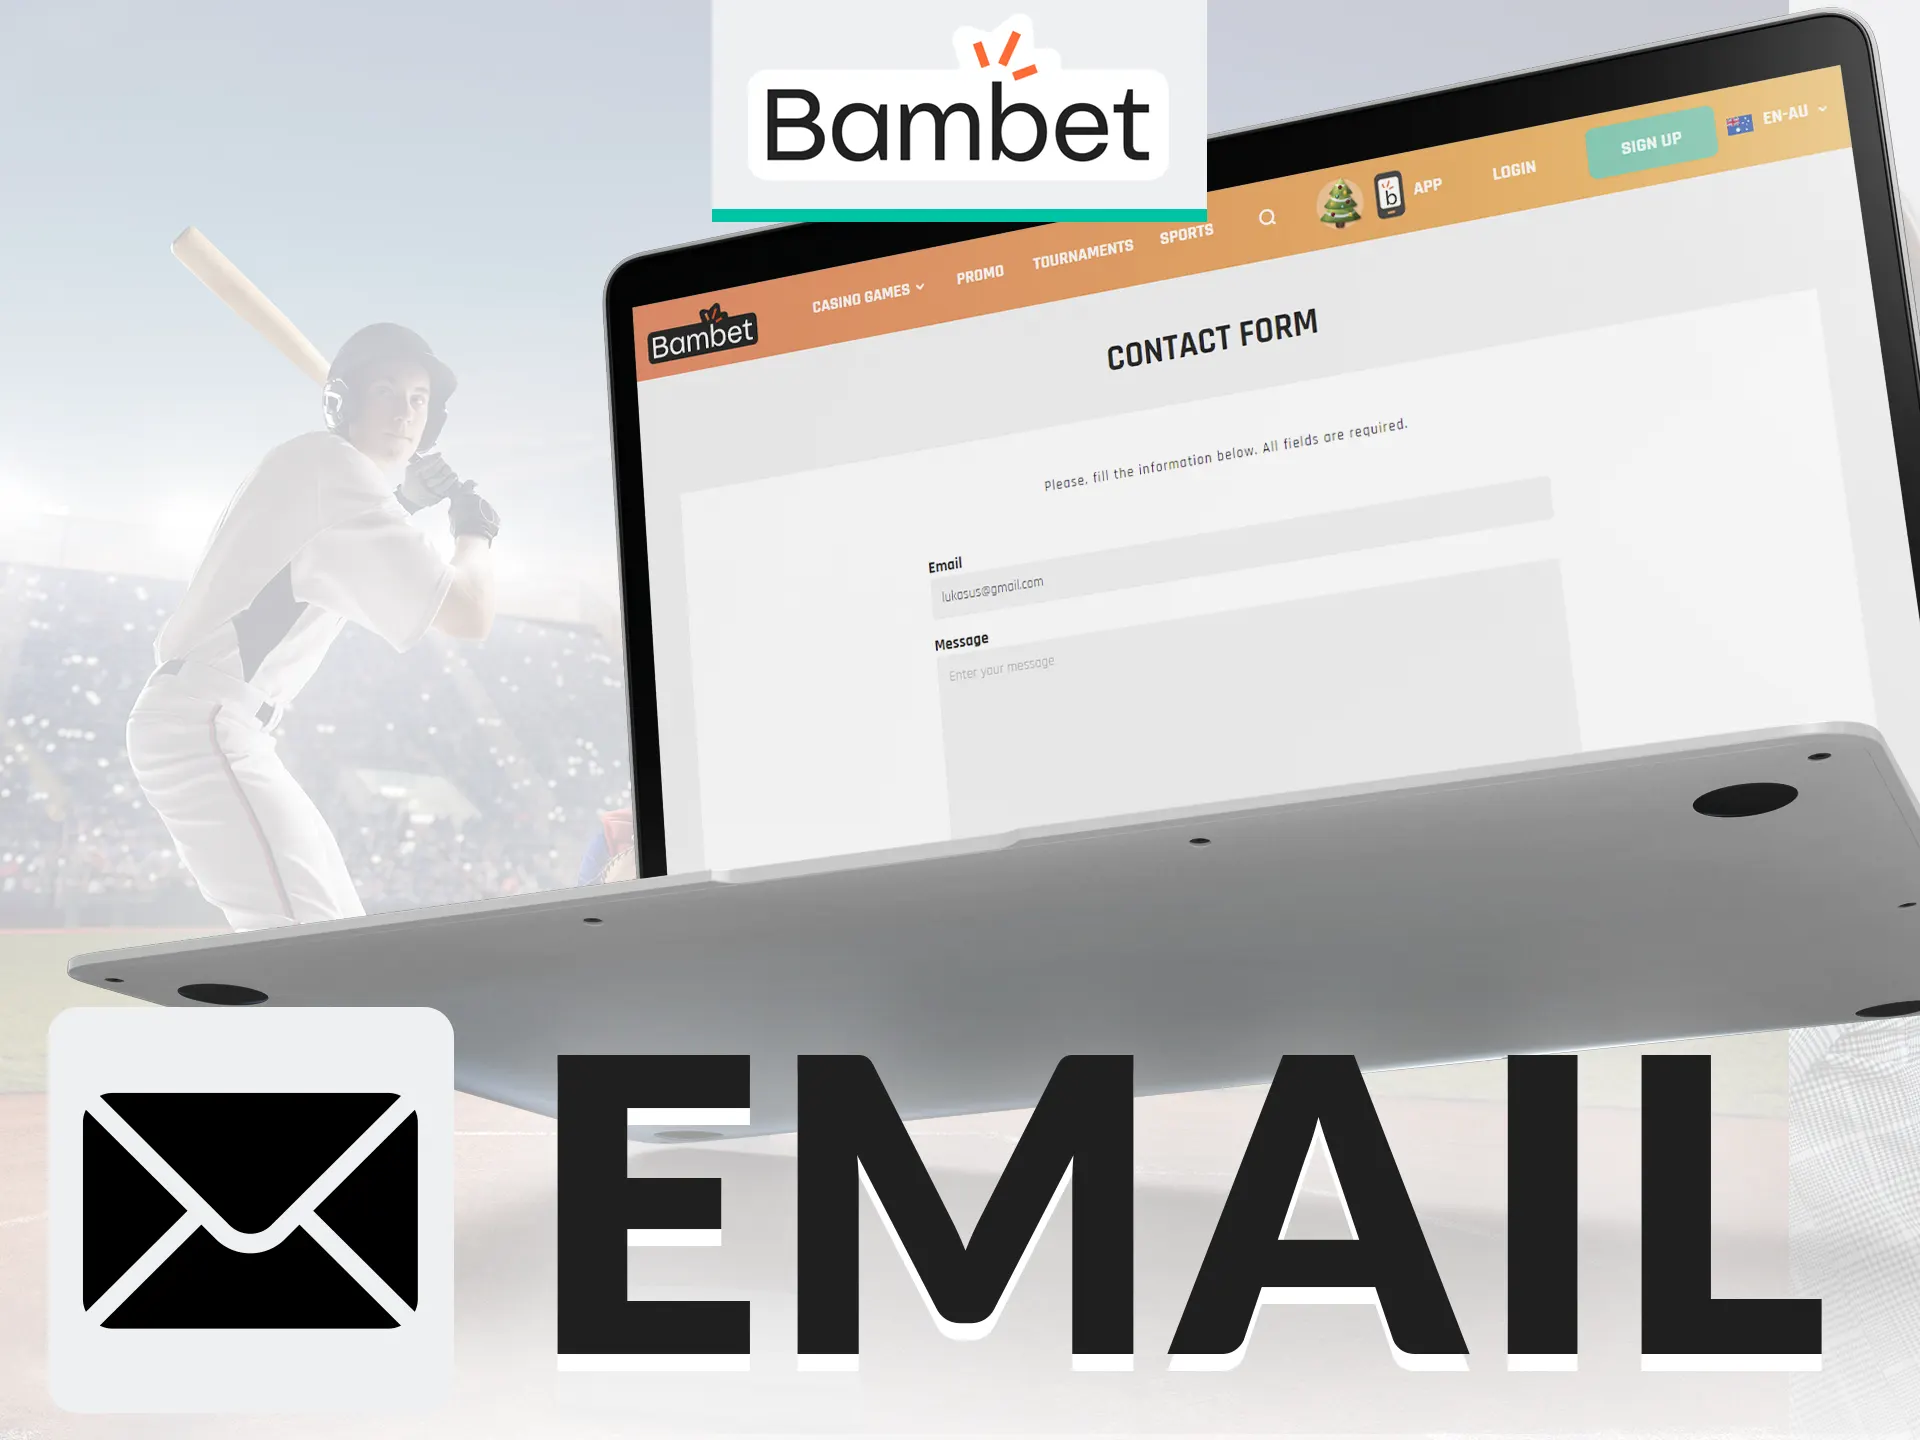 For inquiries without Live Chat, contact Bambet Support at support@bambet.com via email.